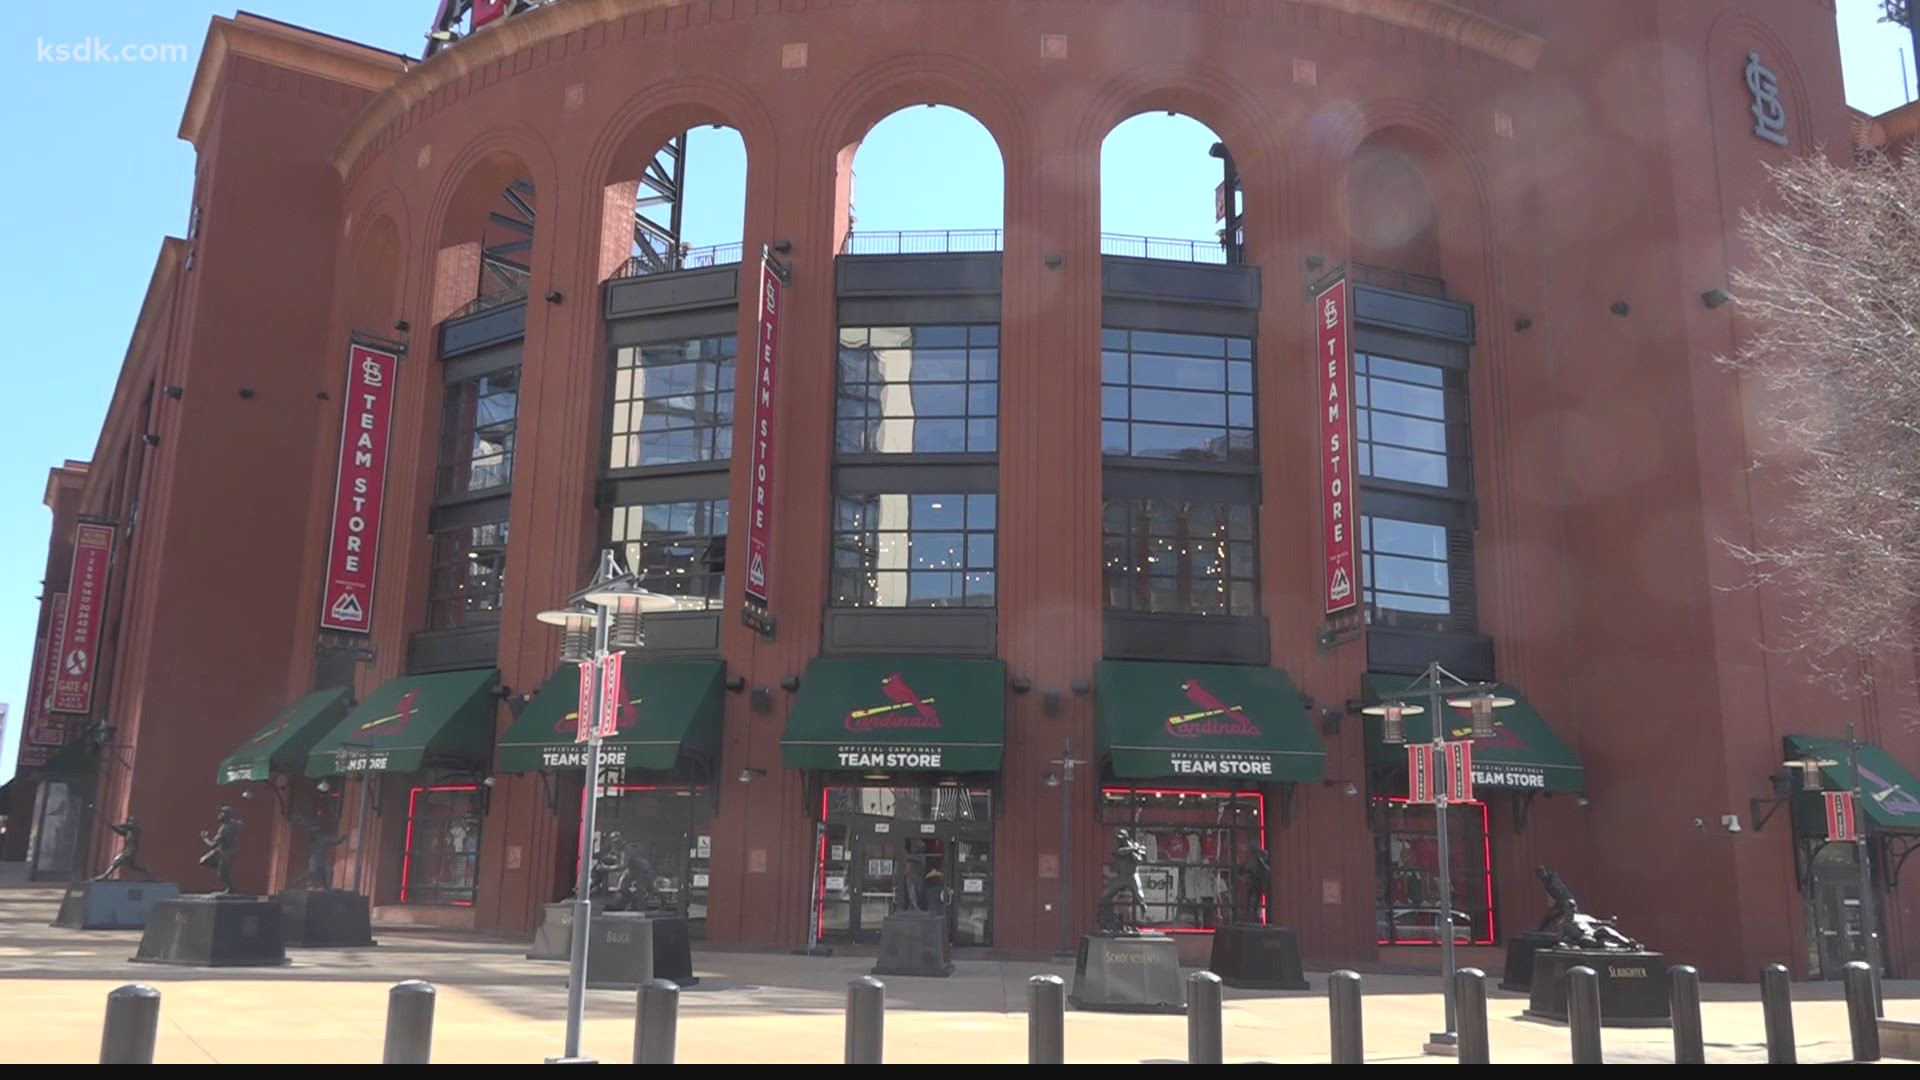 The Cardinals organization said it will begin selling tickets for April home games soon